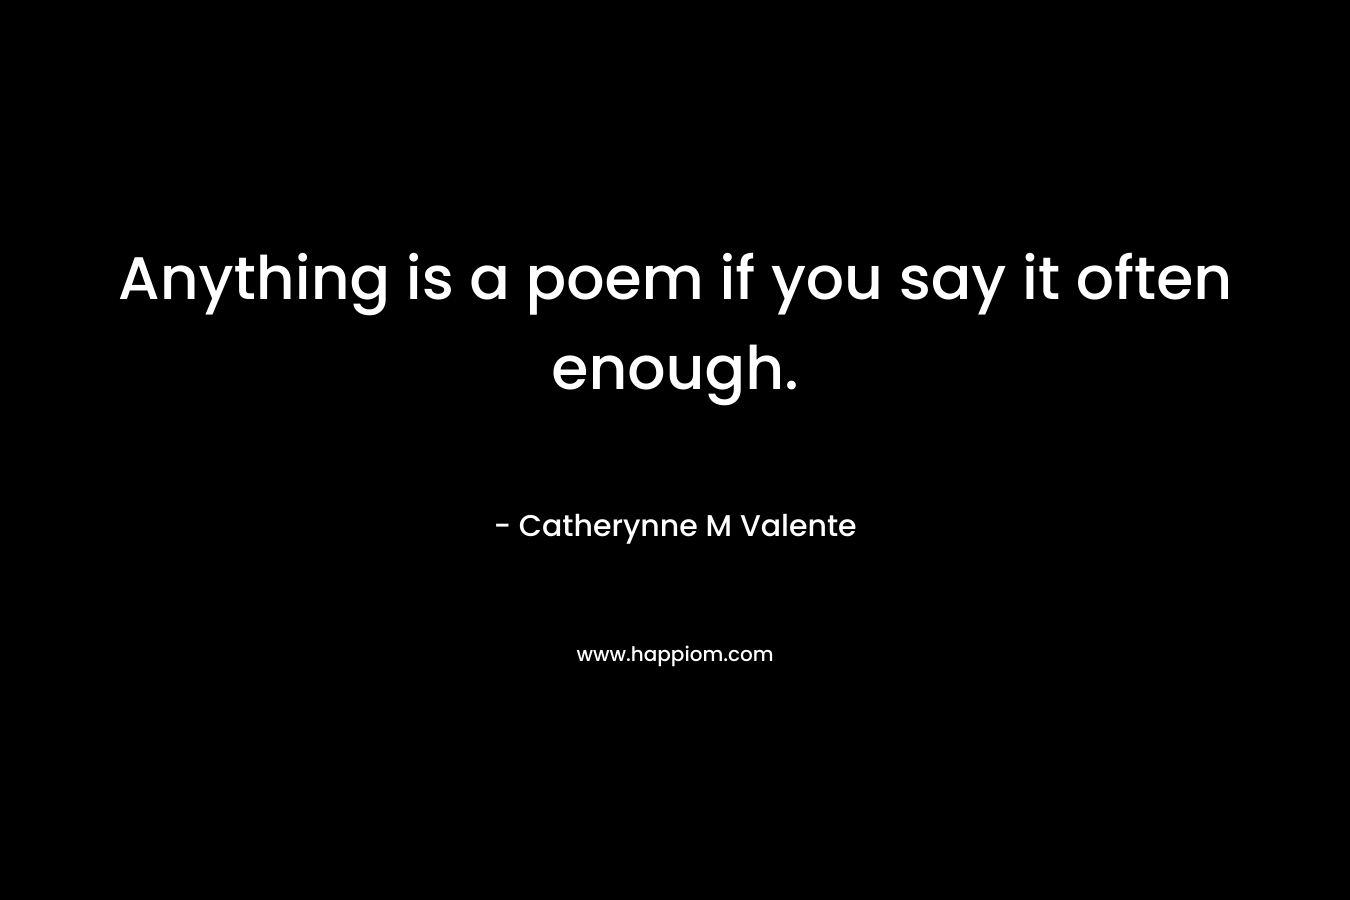 Anything is a poem if you say it often enough. – Catherynne M Valente